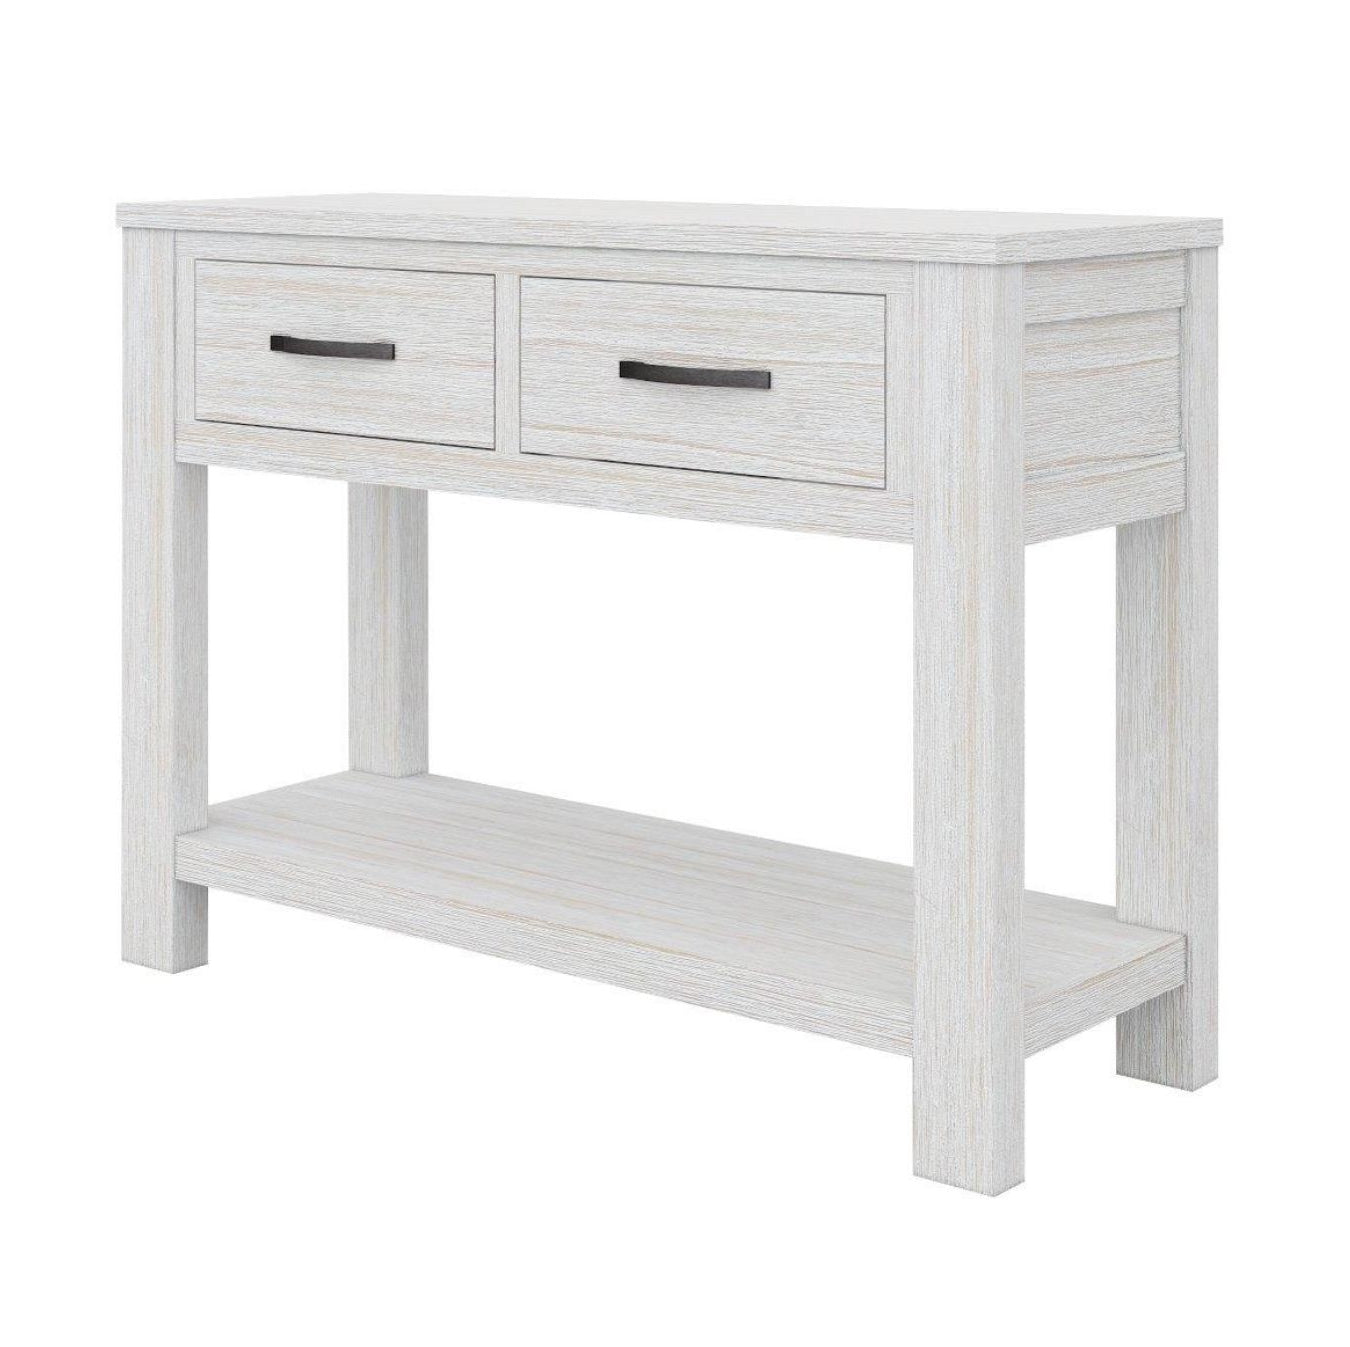 Hallway Entry Table Solid Mt Ash Timber Wood 110cm  - White